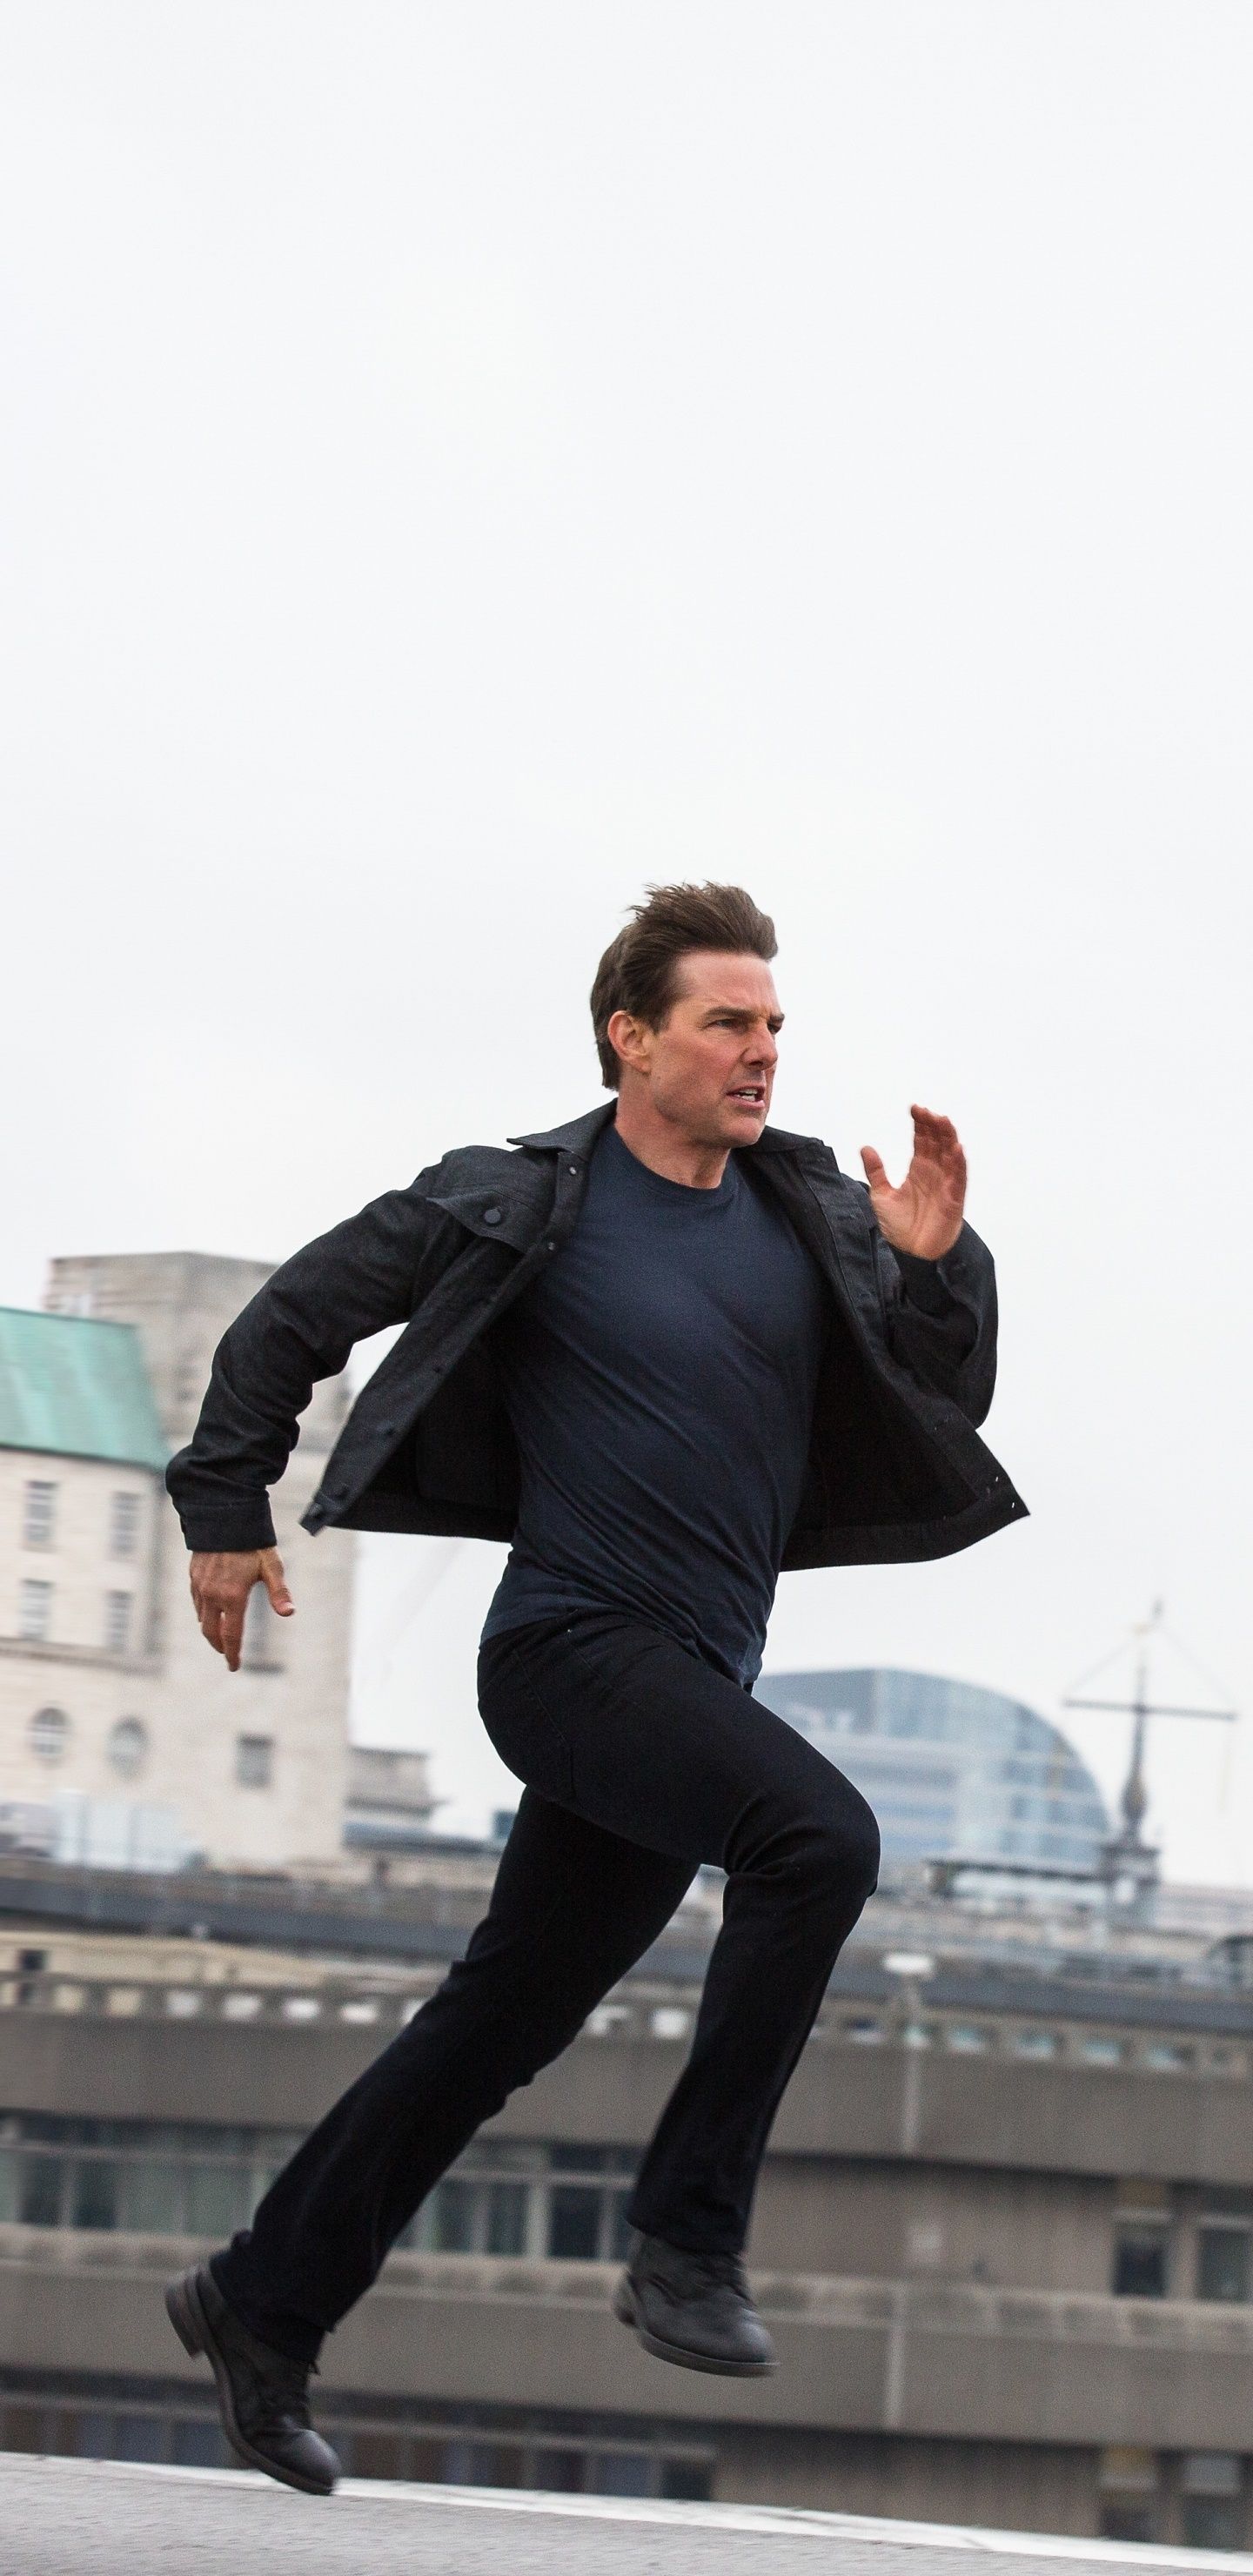 Mission Impossible 7 Wallpapers - Top Free Mission Impossible 7 ...